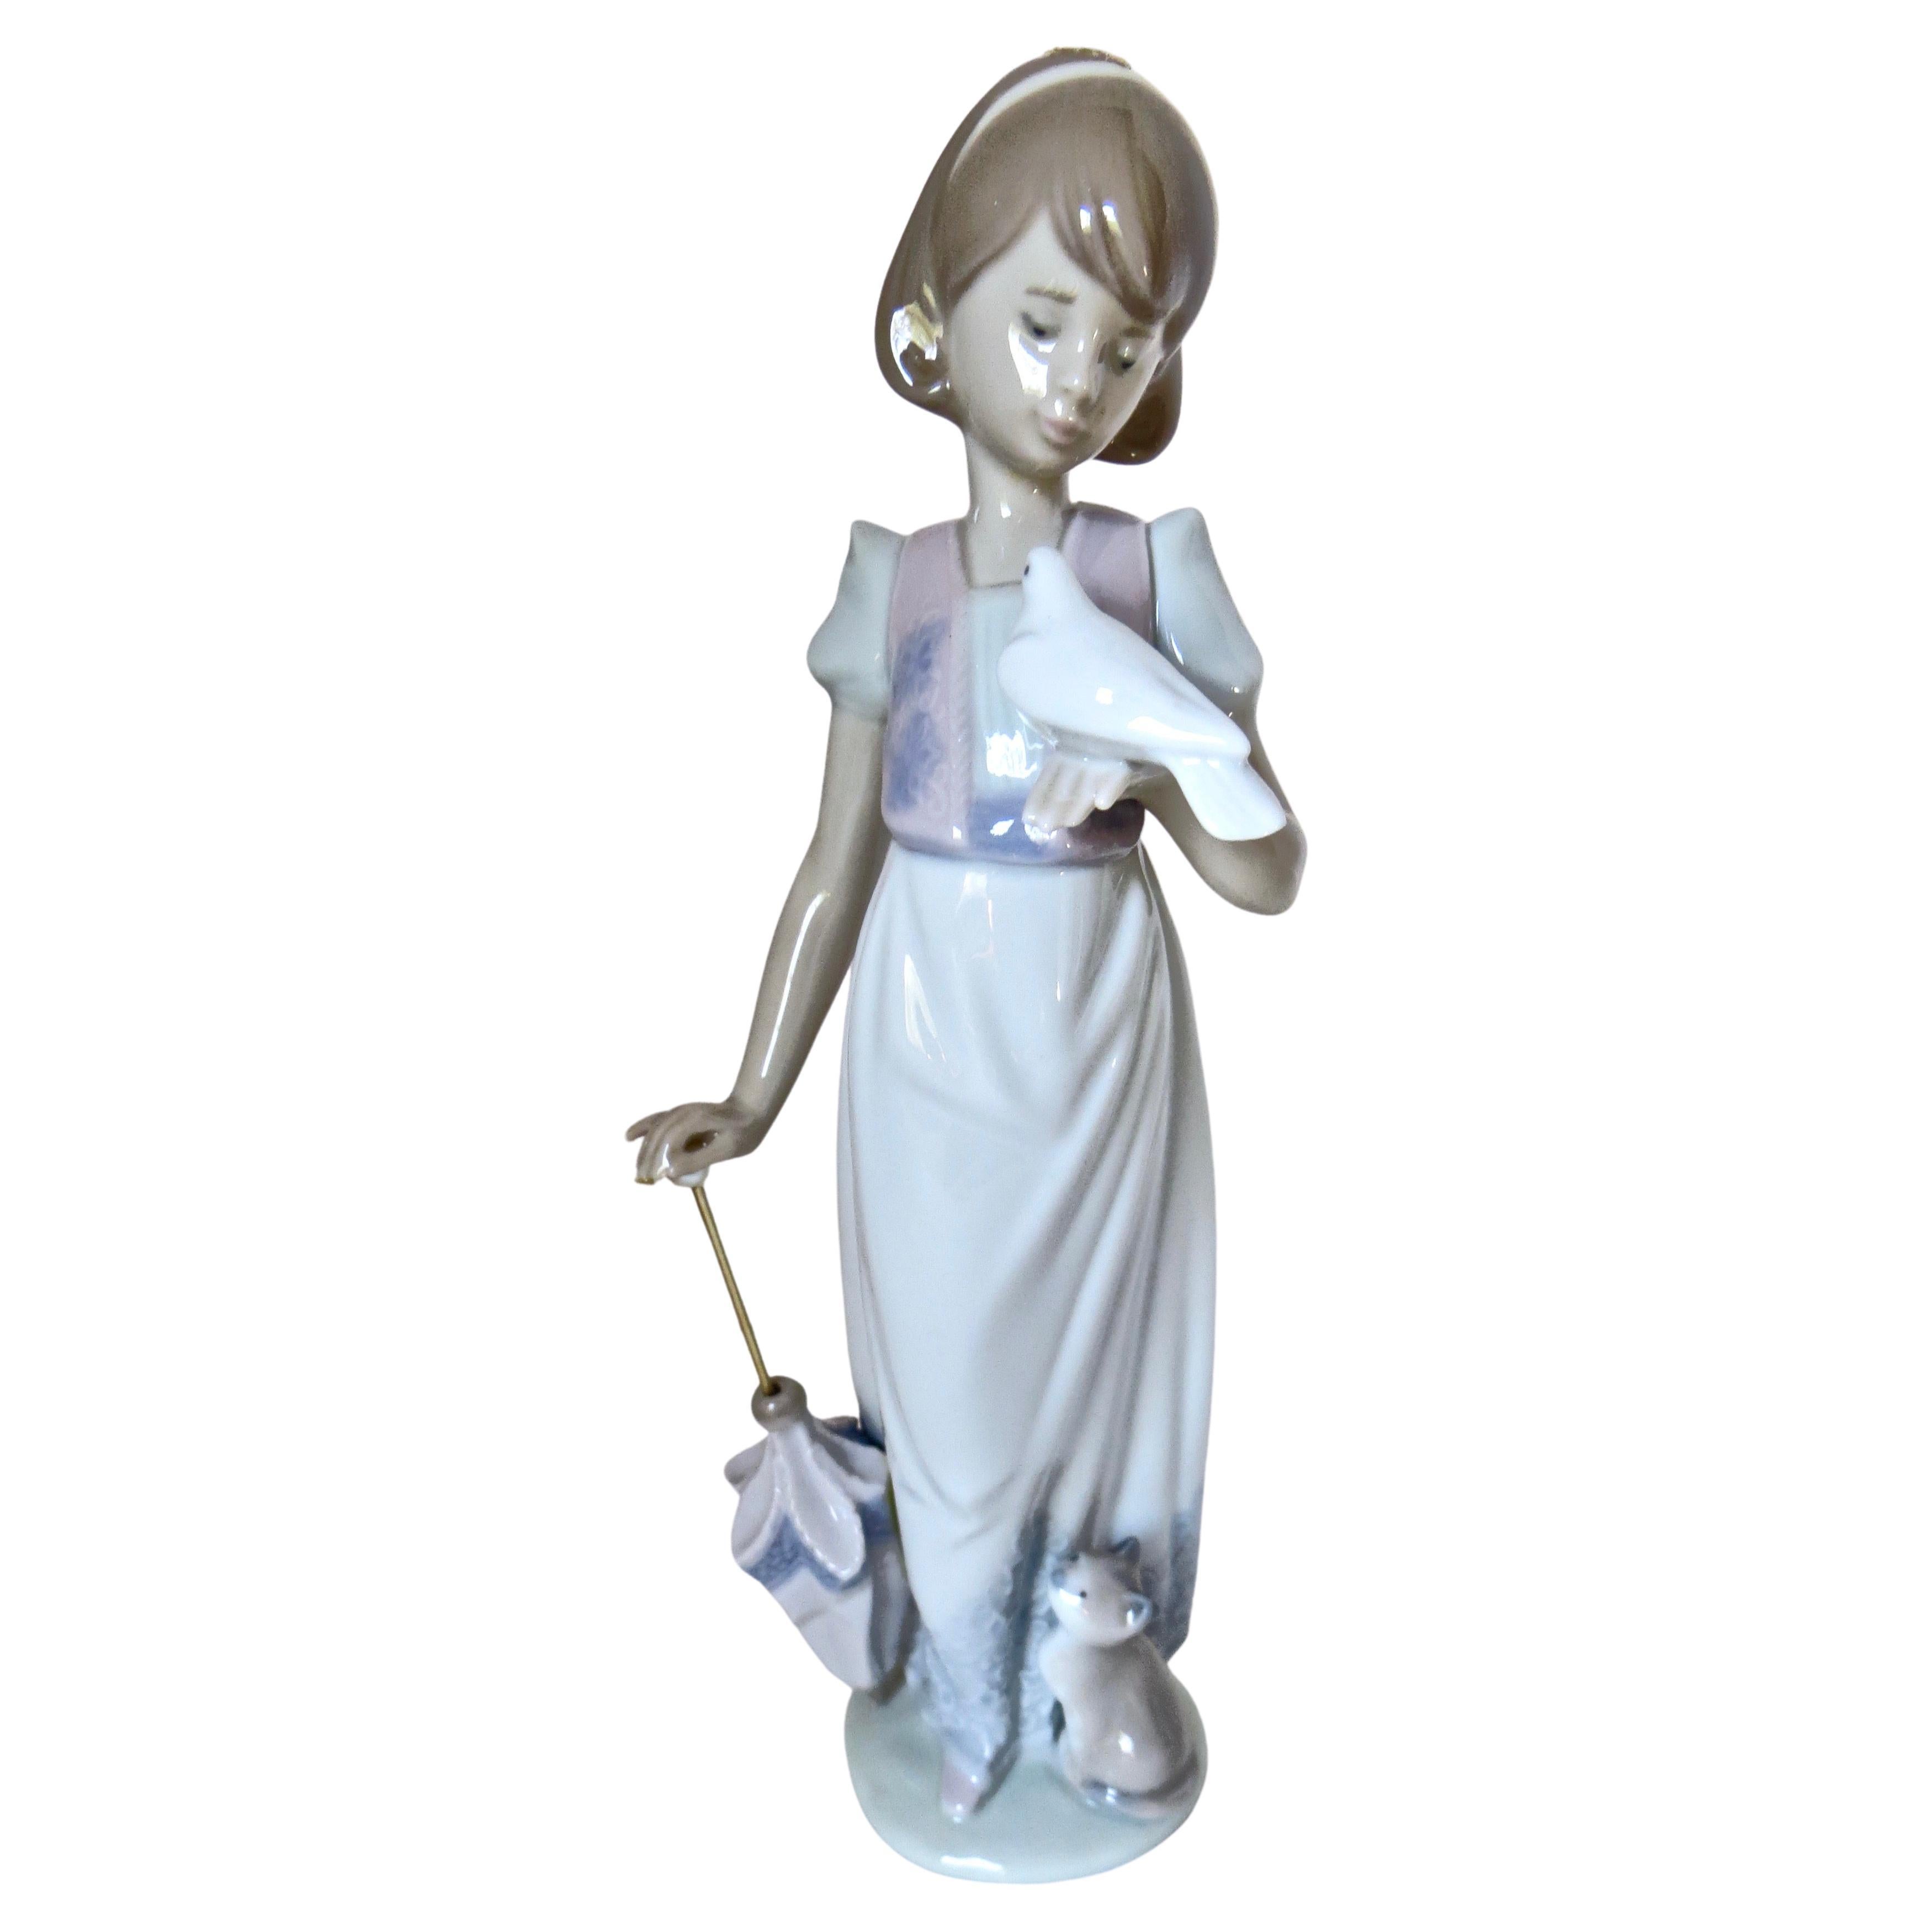 "Summer Stroll" Porcelain Figurine by Lladro, Spain, "Young Girl with Umbrella" For Sale